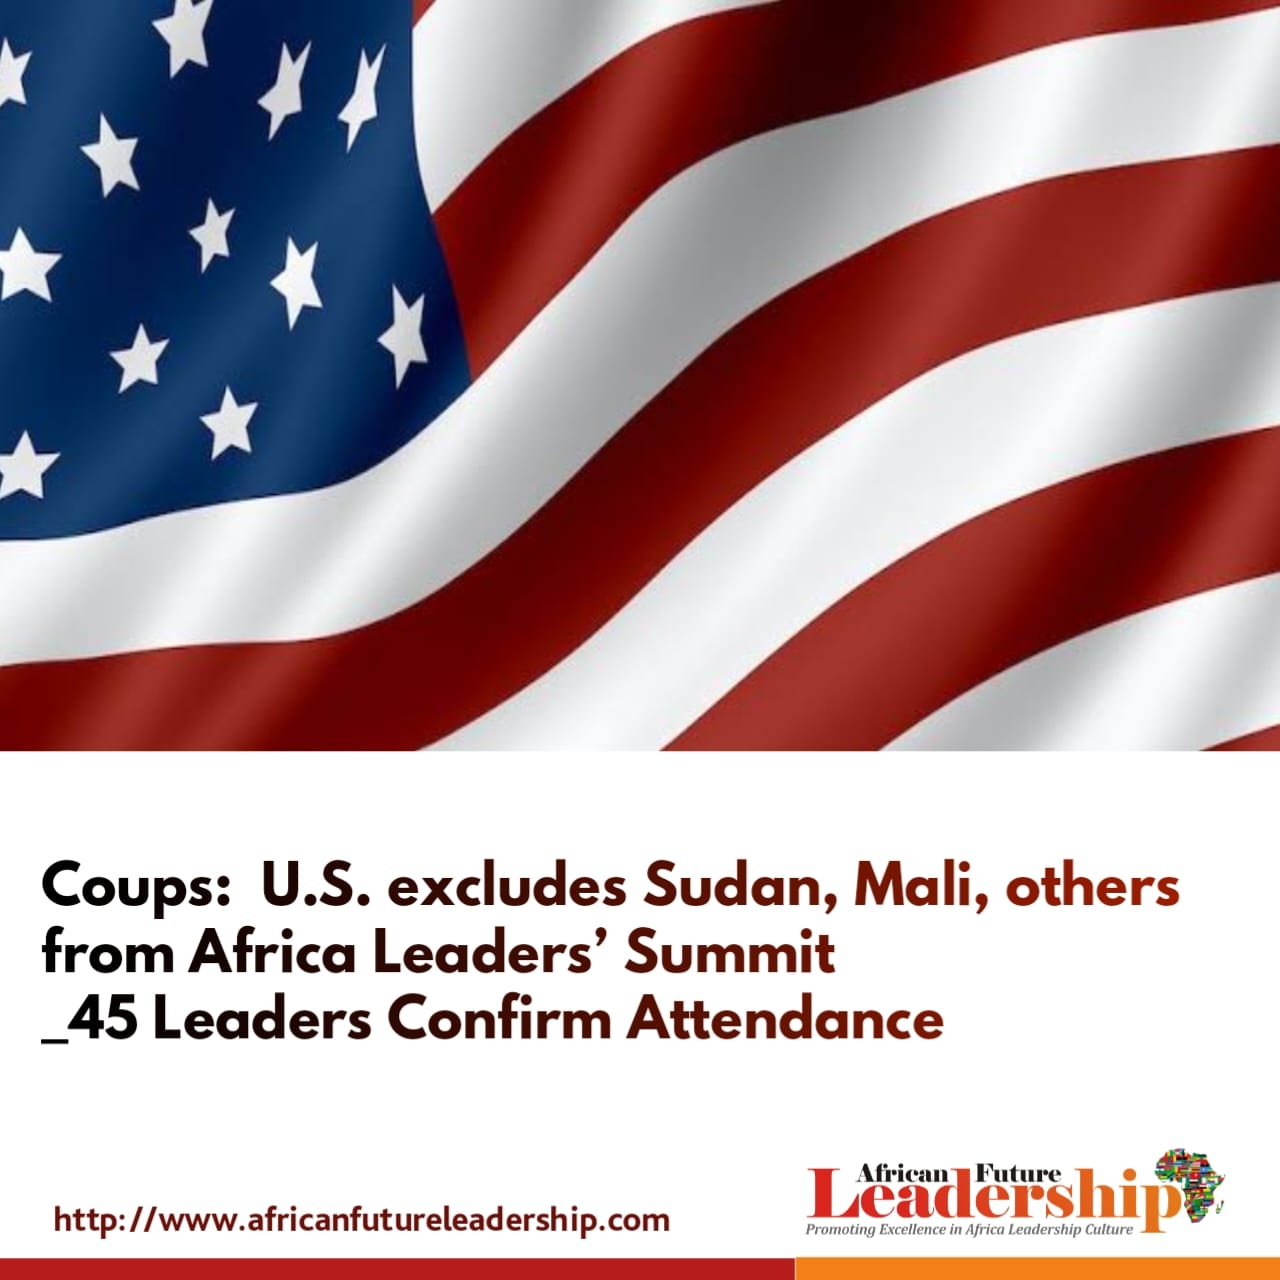 U.S. excludes Sudan, Mali, others from Africa Leaders’ Summit — 45 Leaders Confirm Attendance